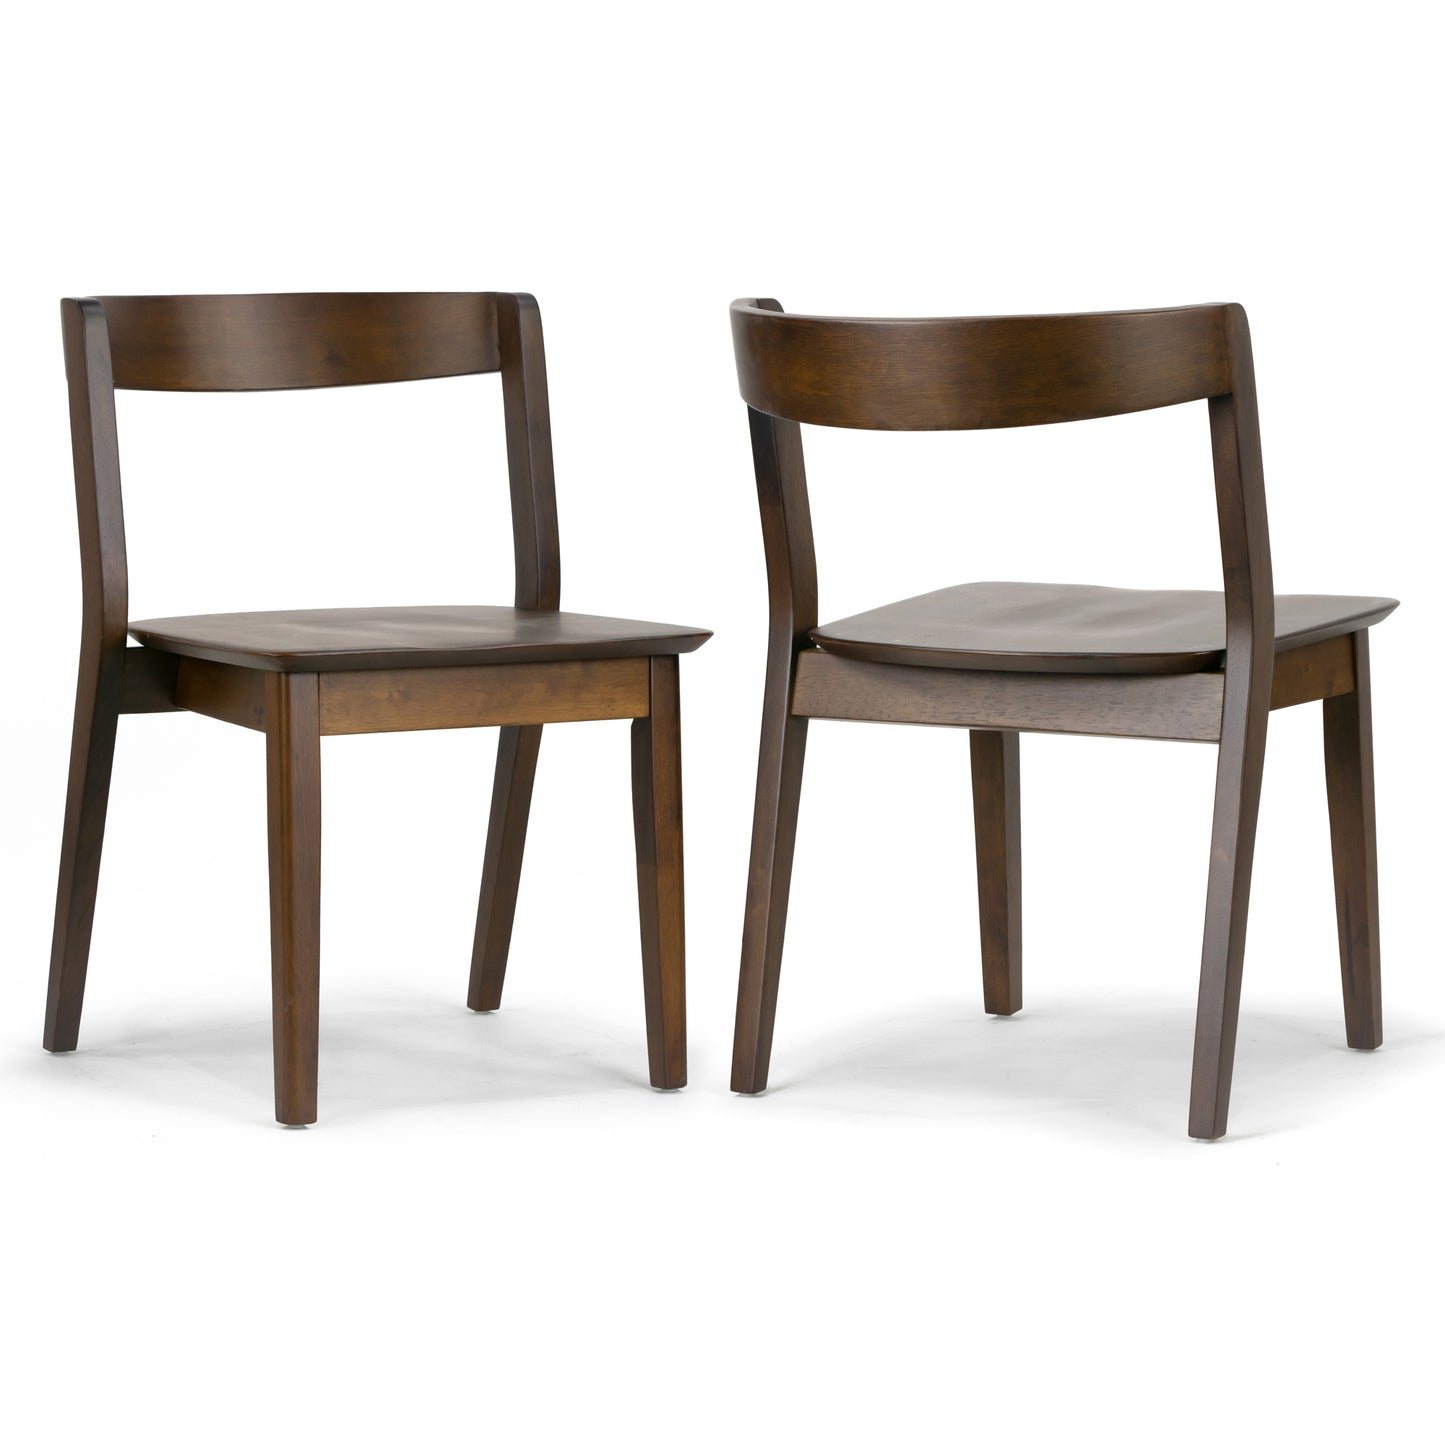 Set of 2 Astor Dark Brown Solid Wood Chair with Curved Back